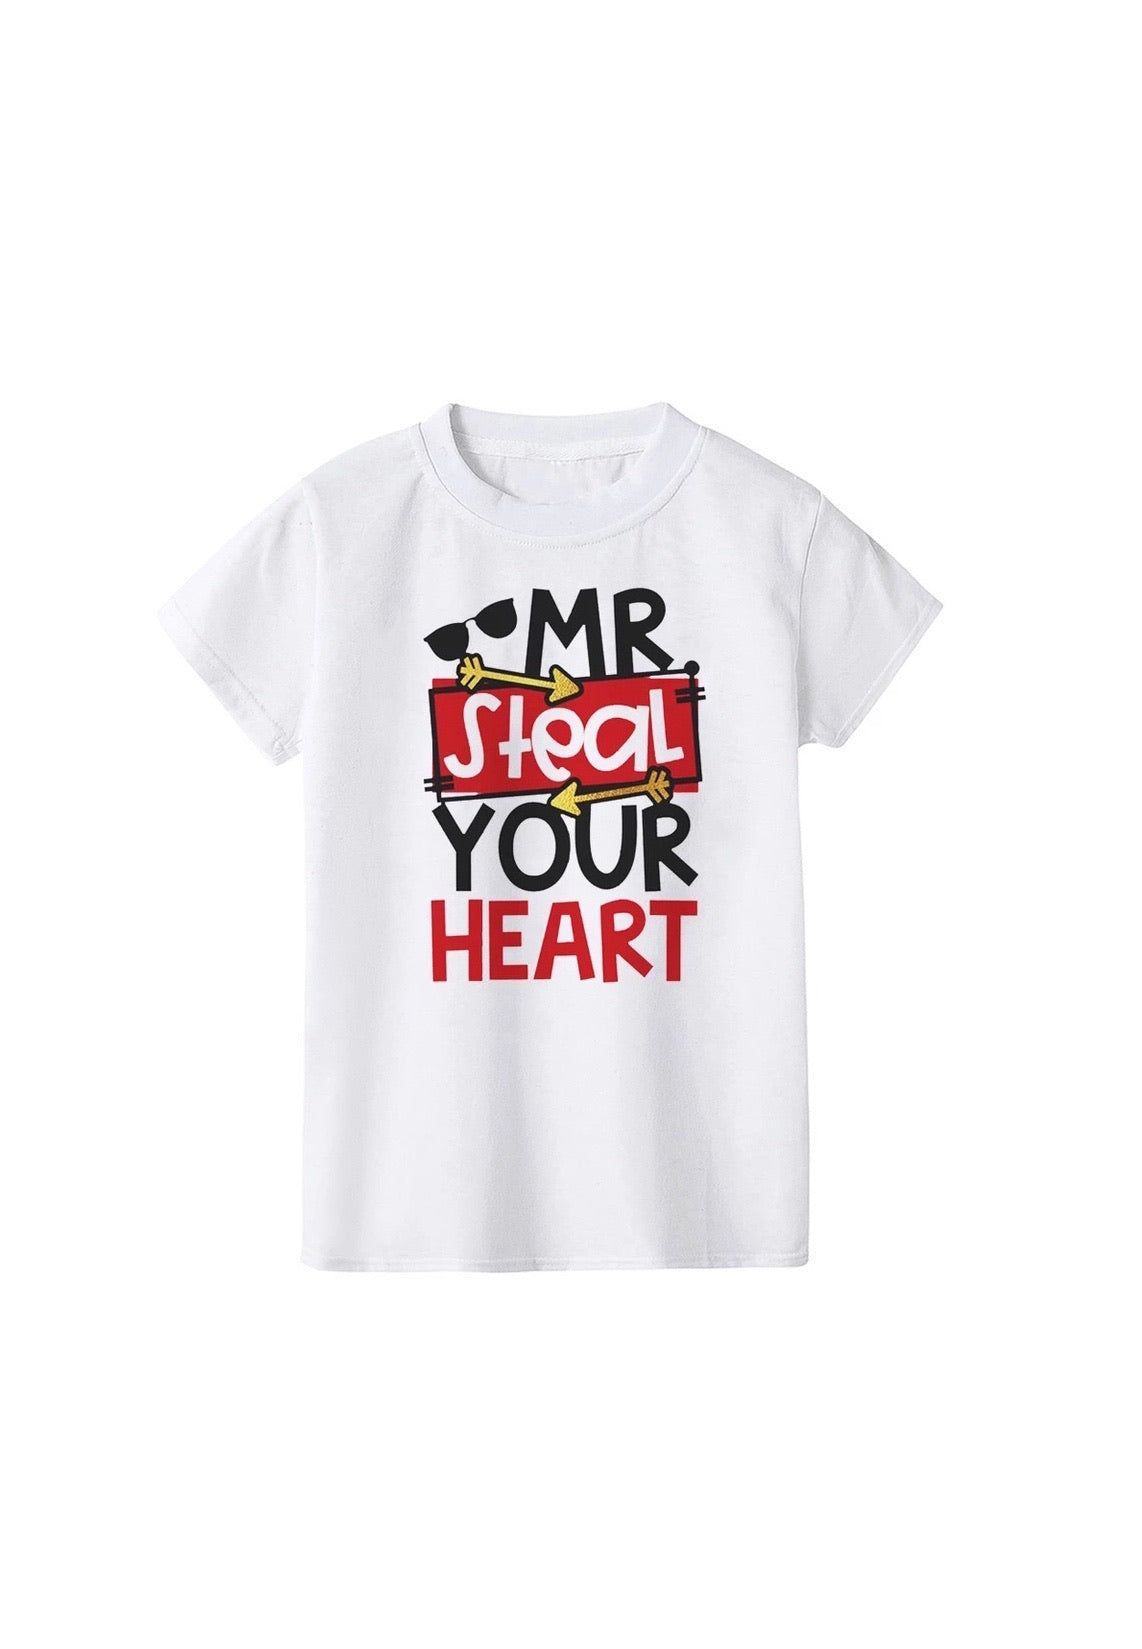 Mr Steal Your Heart T-shirt